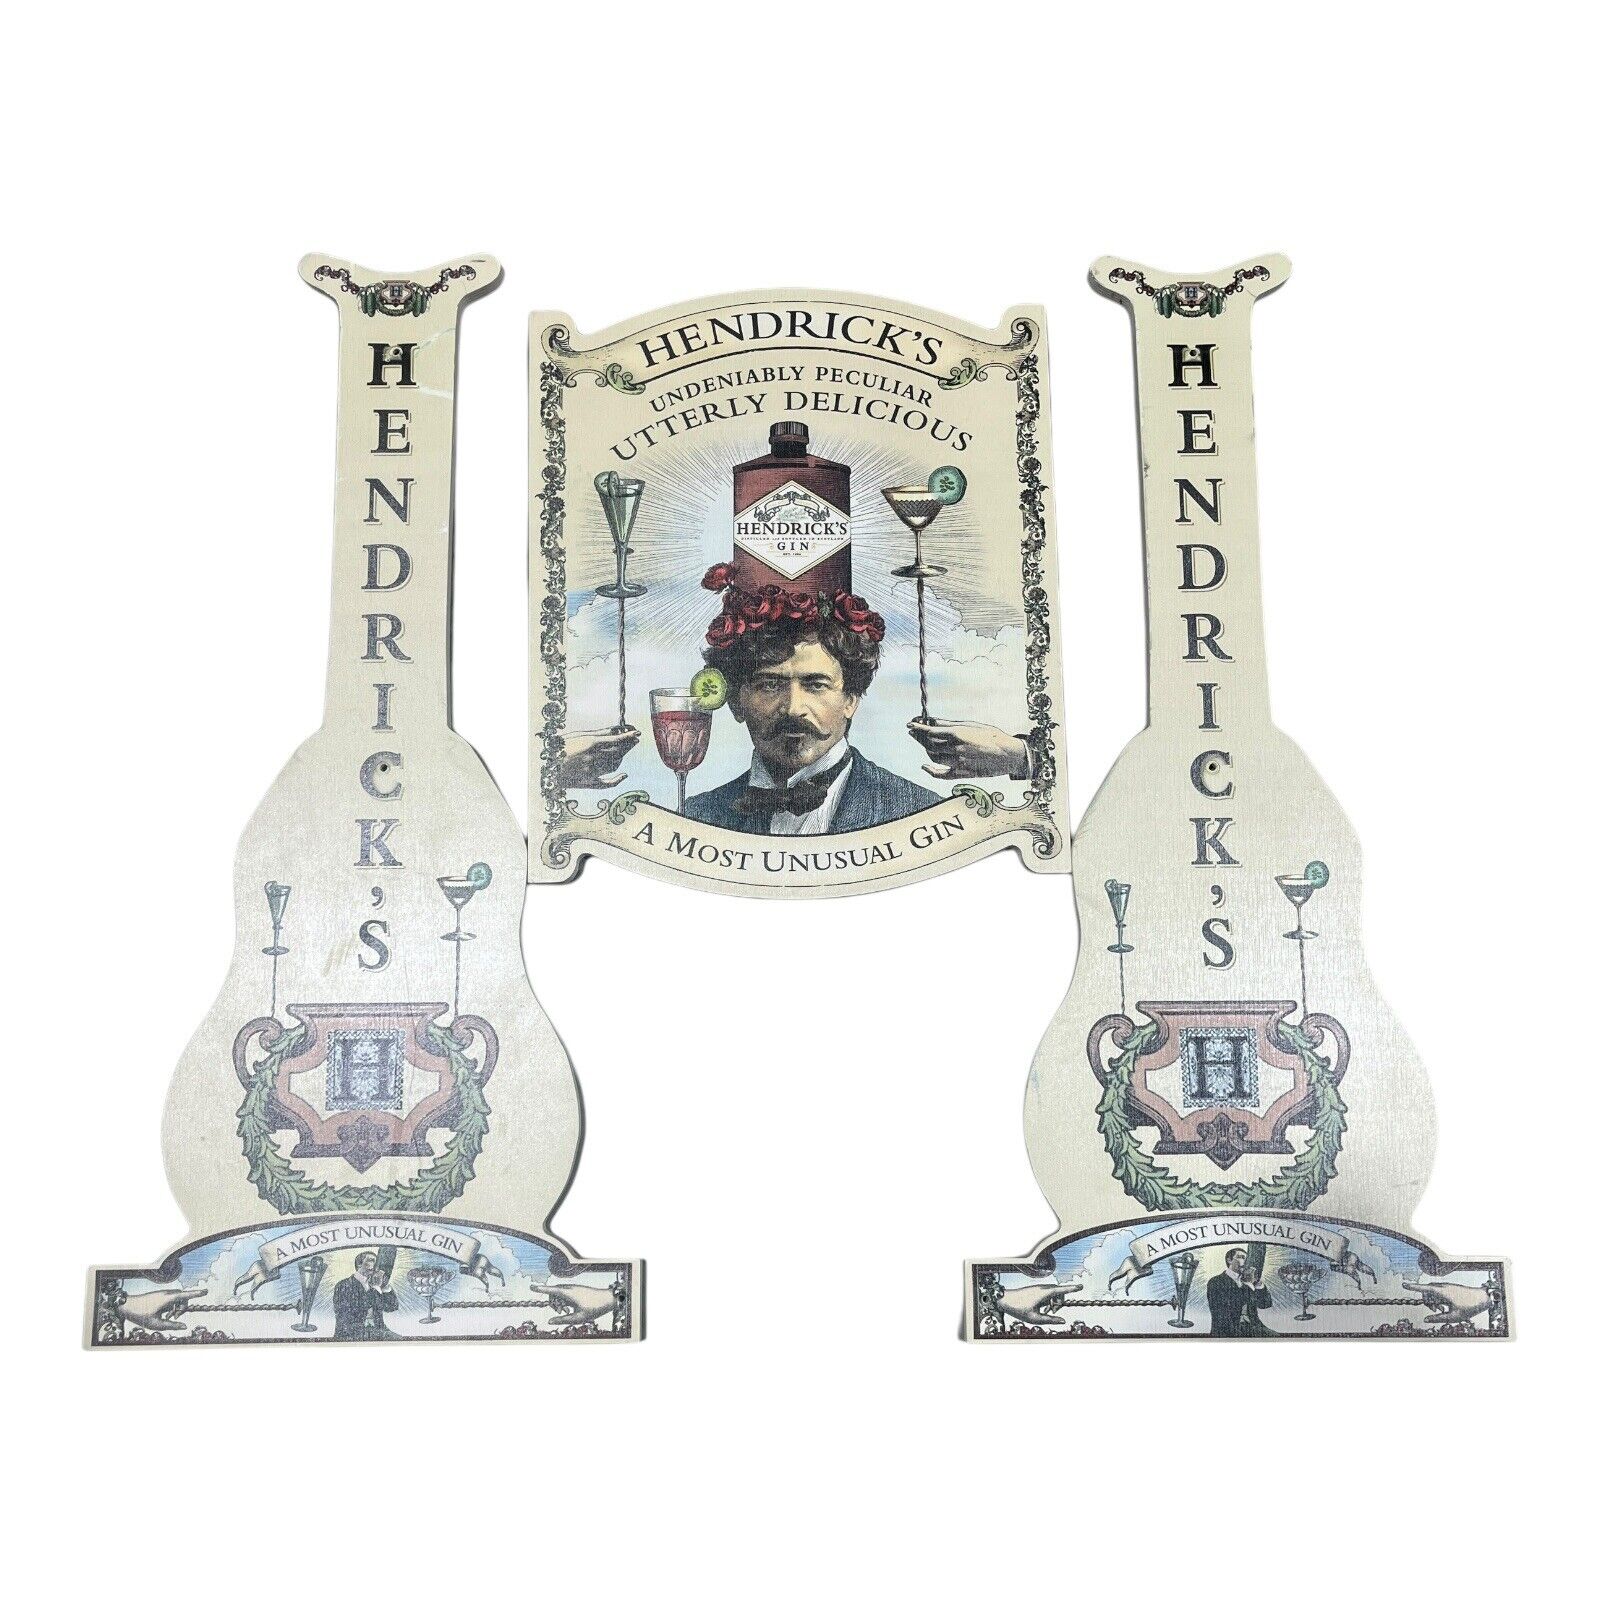 Rare Hendricks Gin Wooden Advertising Sign Man Cave Lot Of 3 High Quality Large